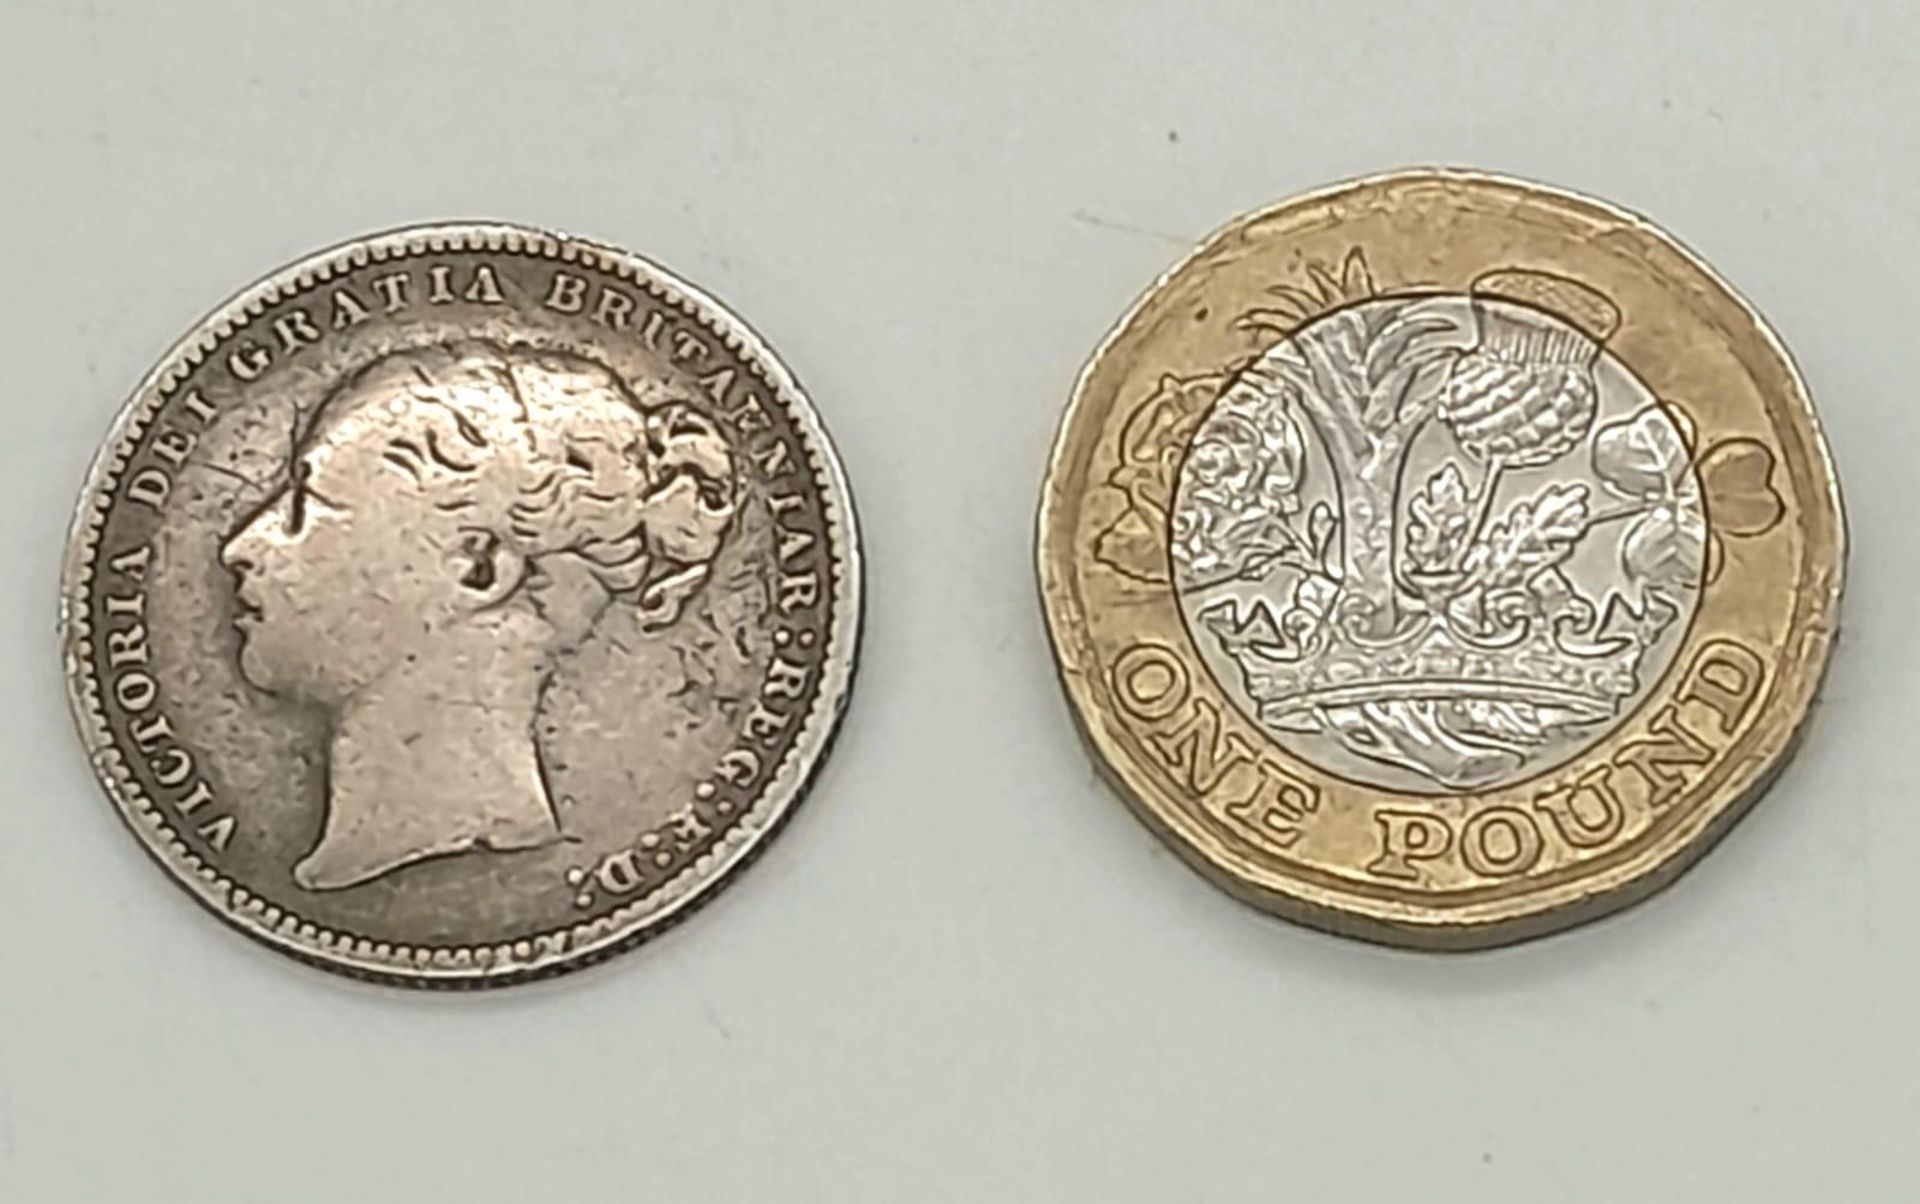 An 1879 Queen Victoria Silver Shilling. Please see photos for conditions. - Image 3 of 3